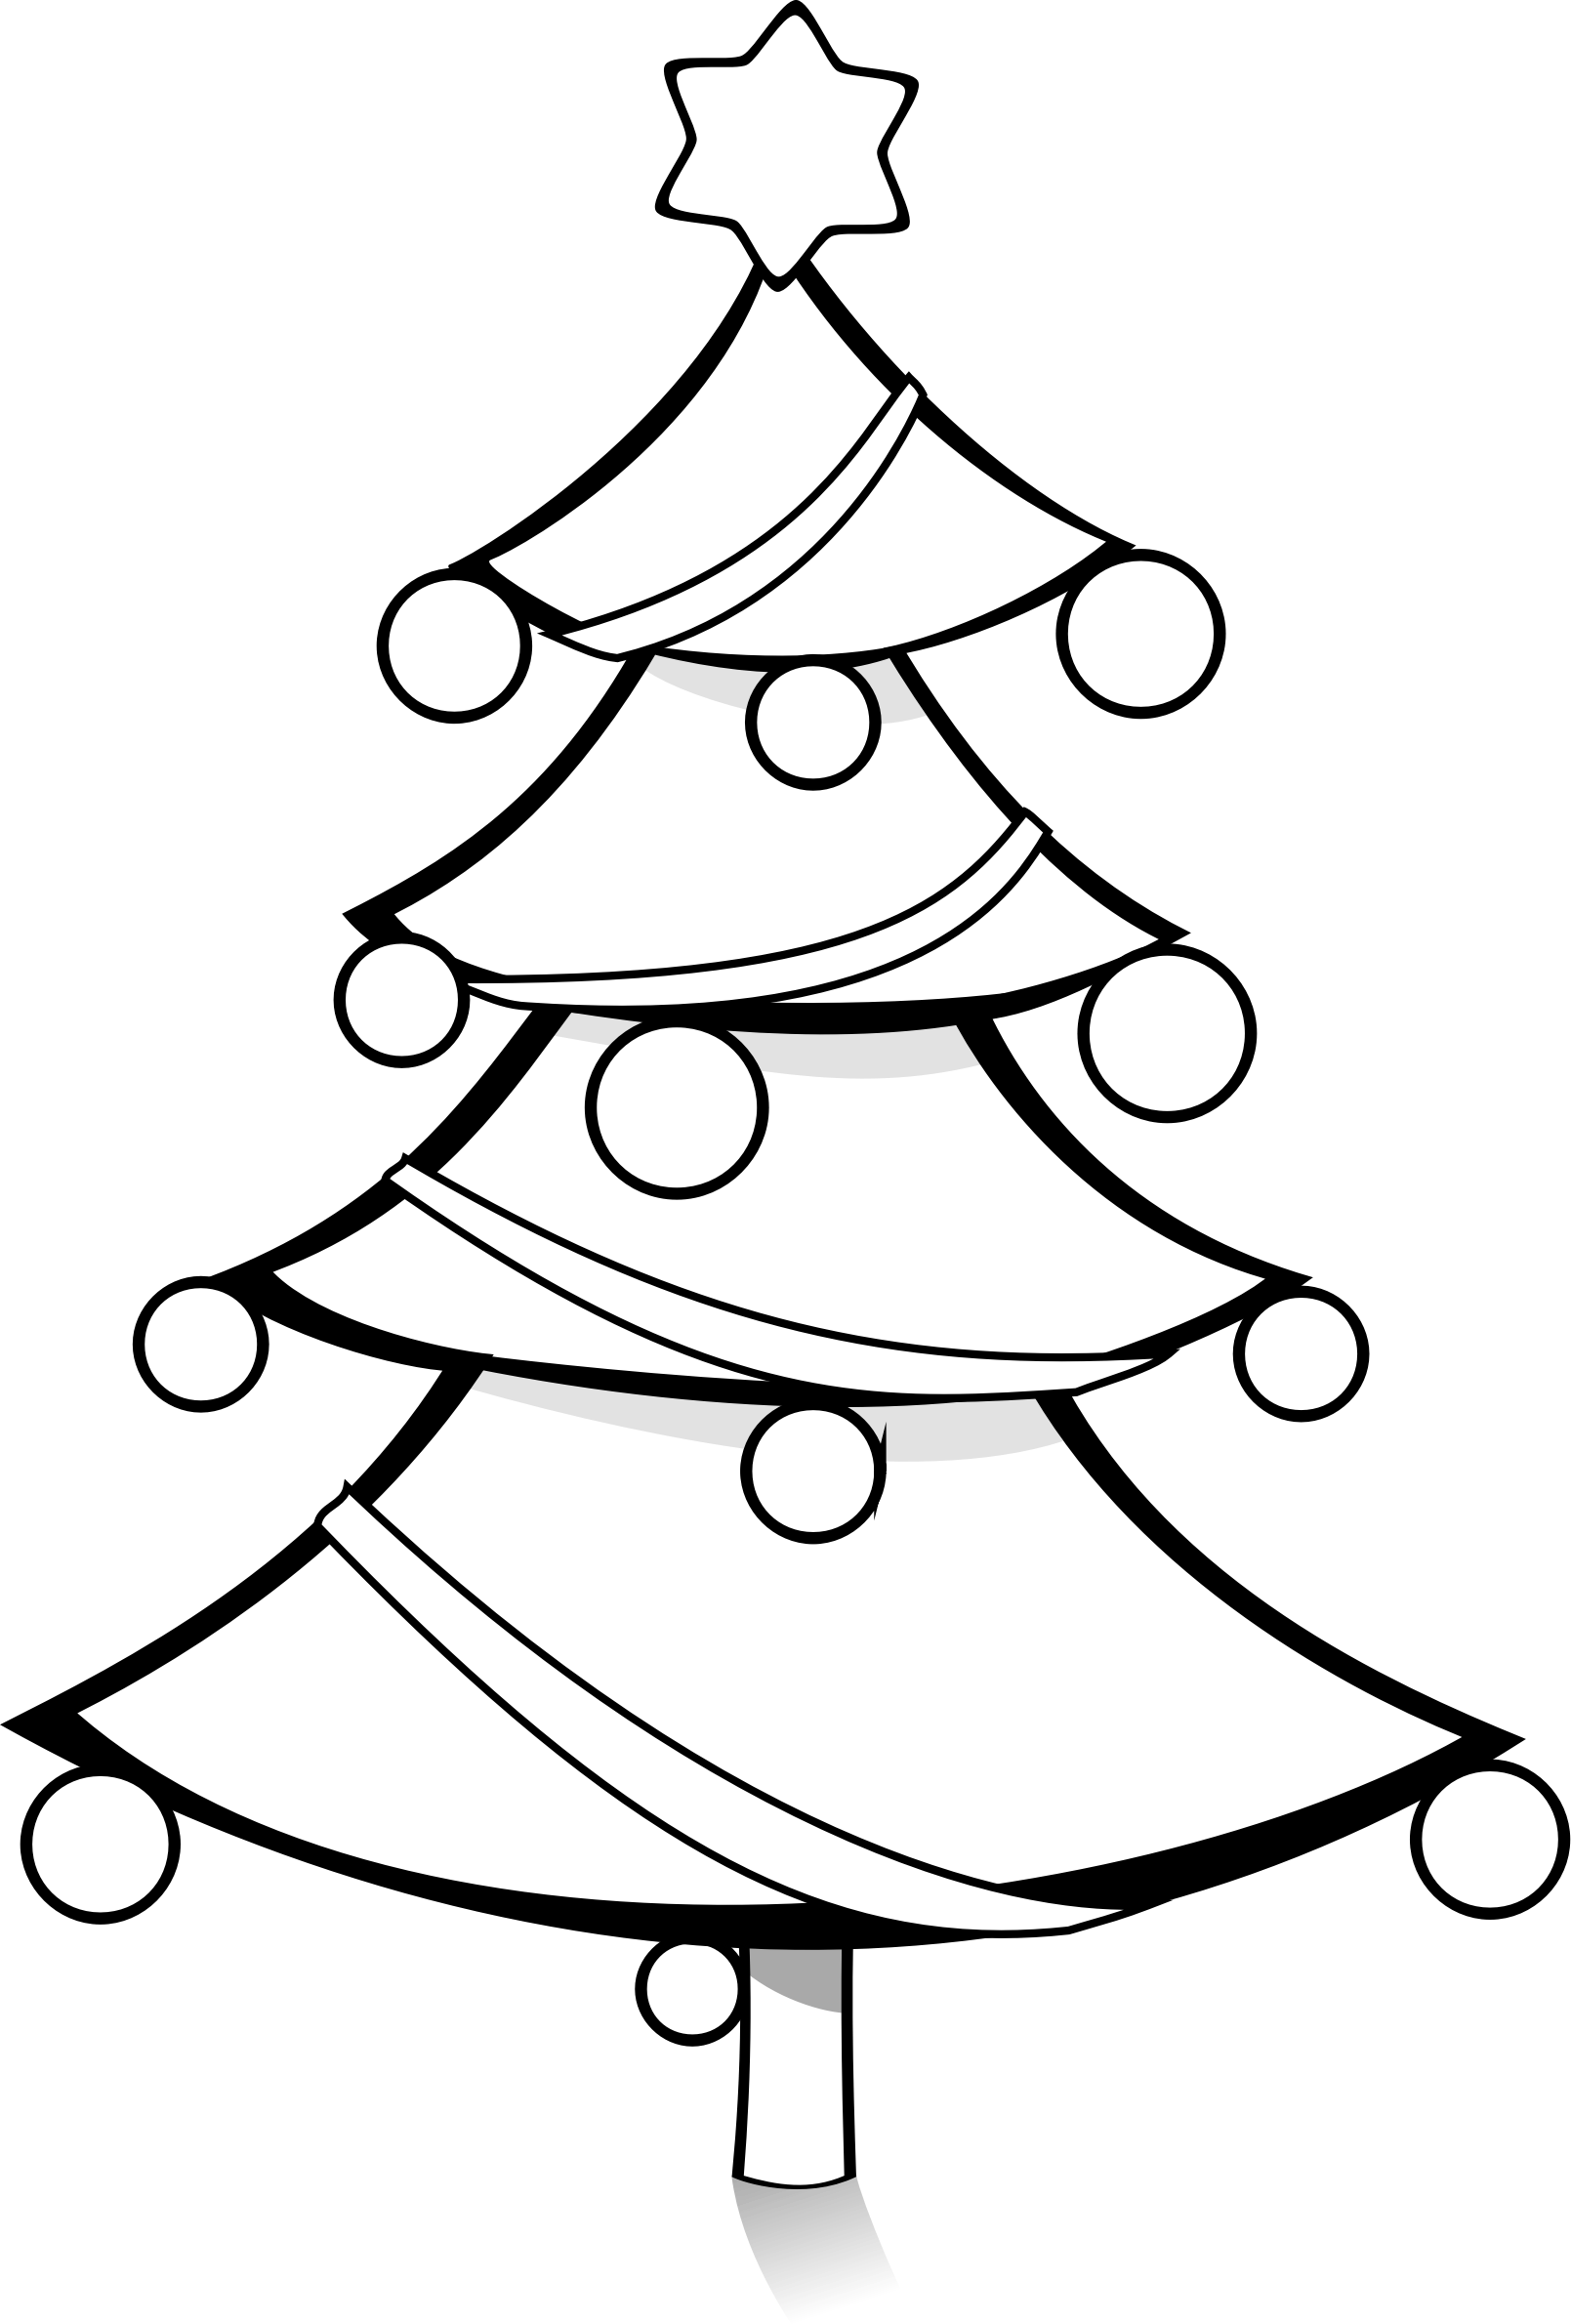 Fitness clipart christmas. Black and white tree